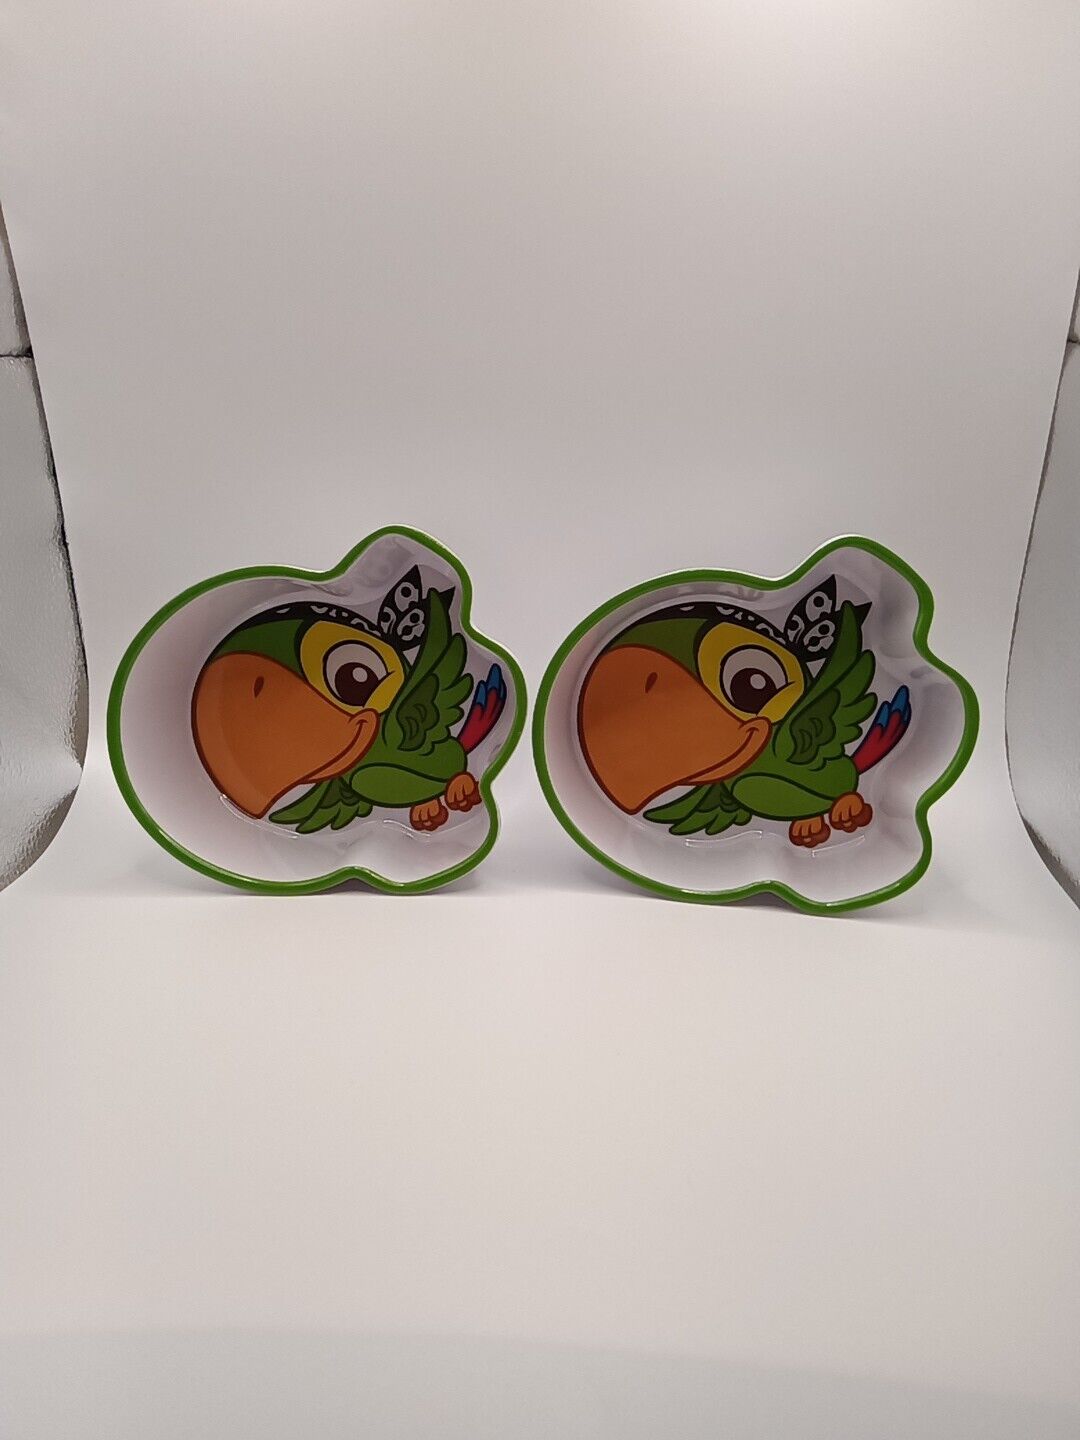 DISNEY'S STORE PARROT FROM PIRATES CARIBBEAN CHILD BOWLS CEREAL BOWL SNACK DISH 